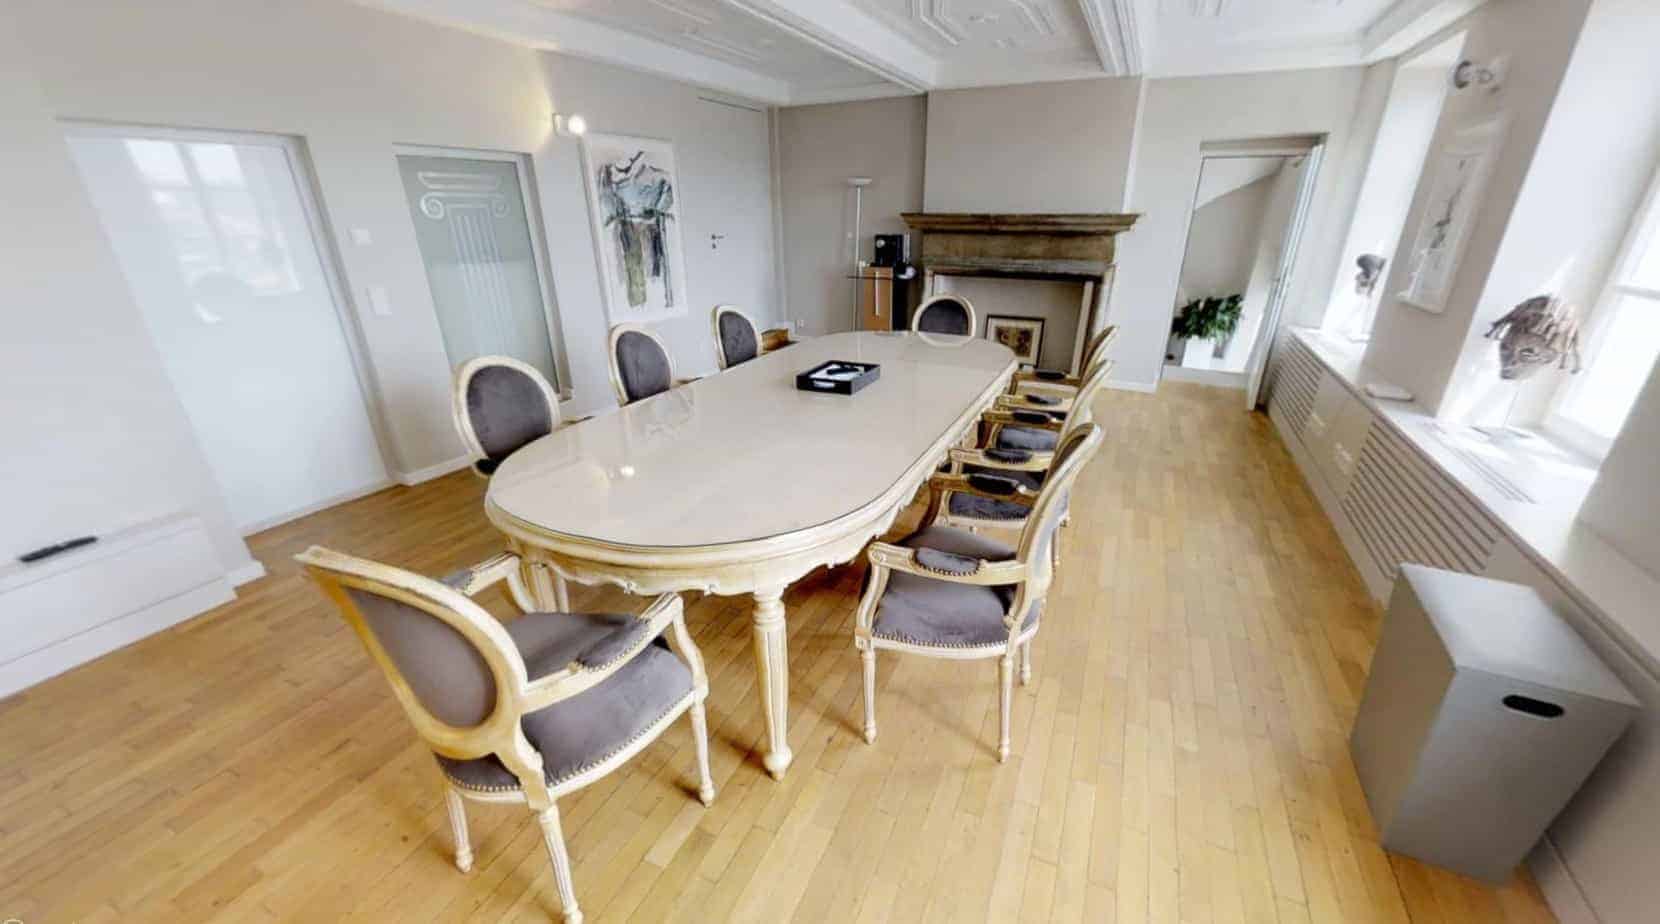 Elegant and spacious venue for business meetings